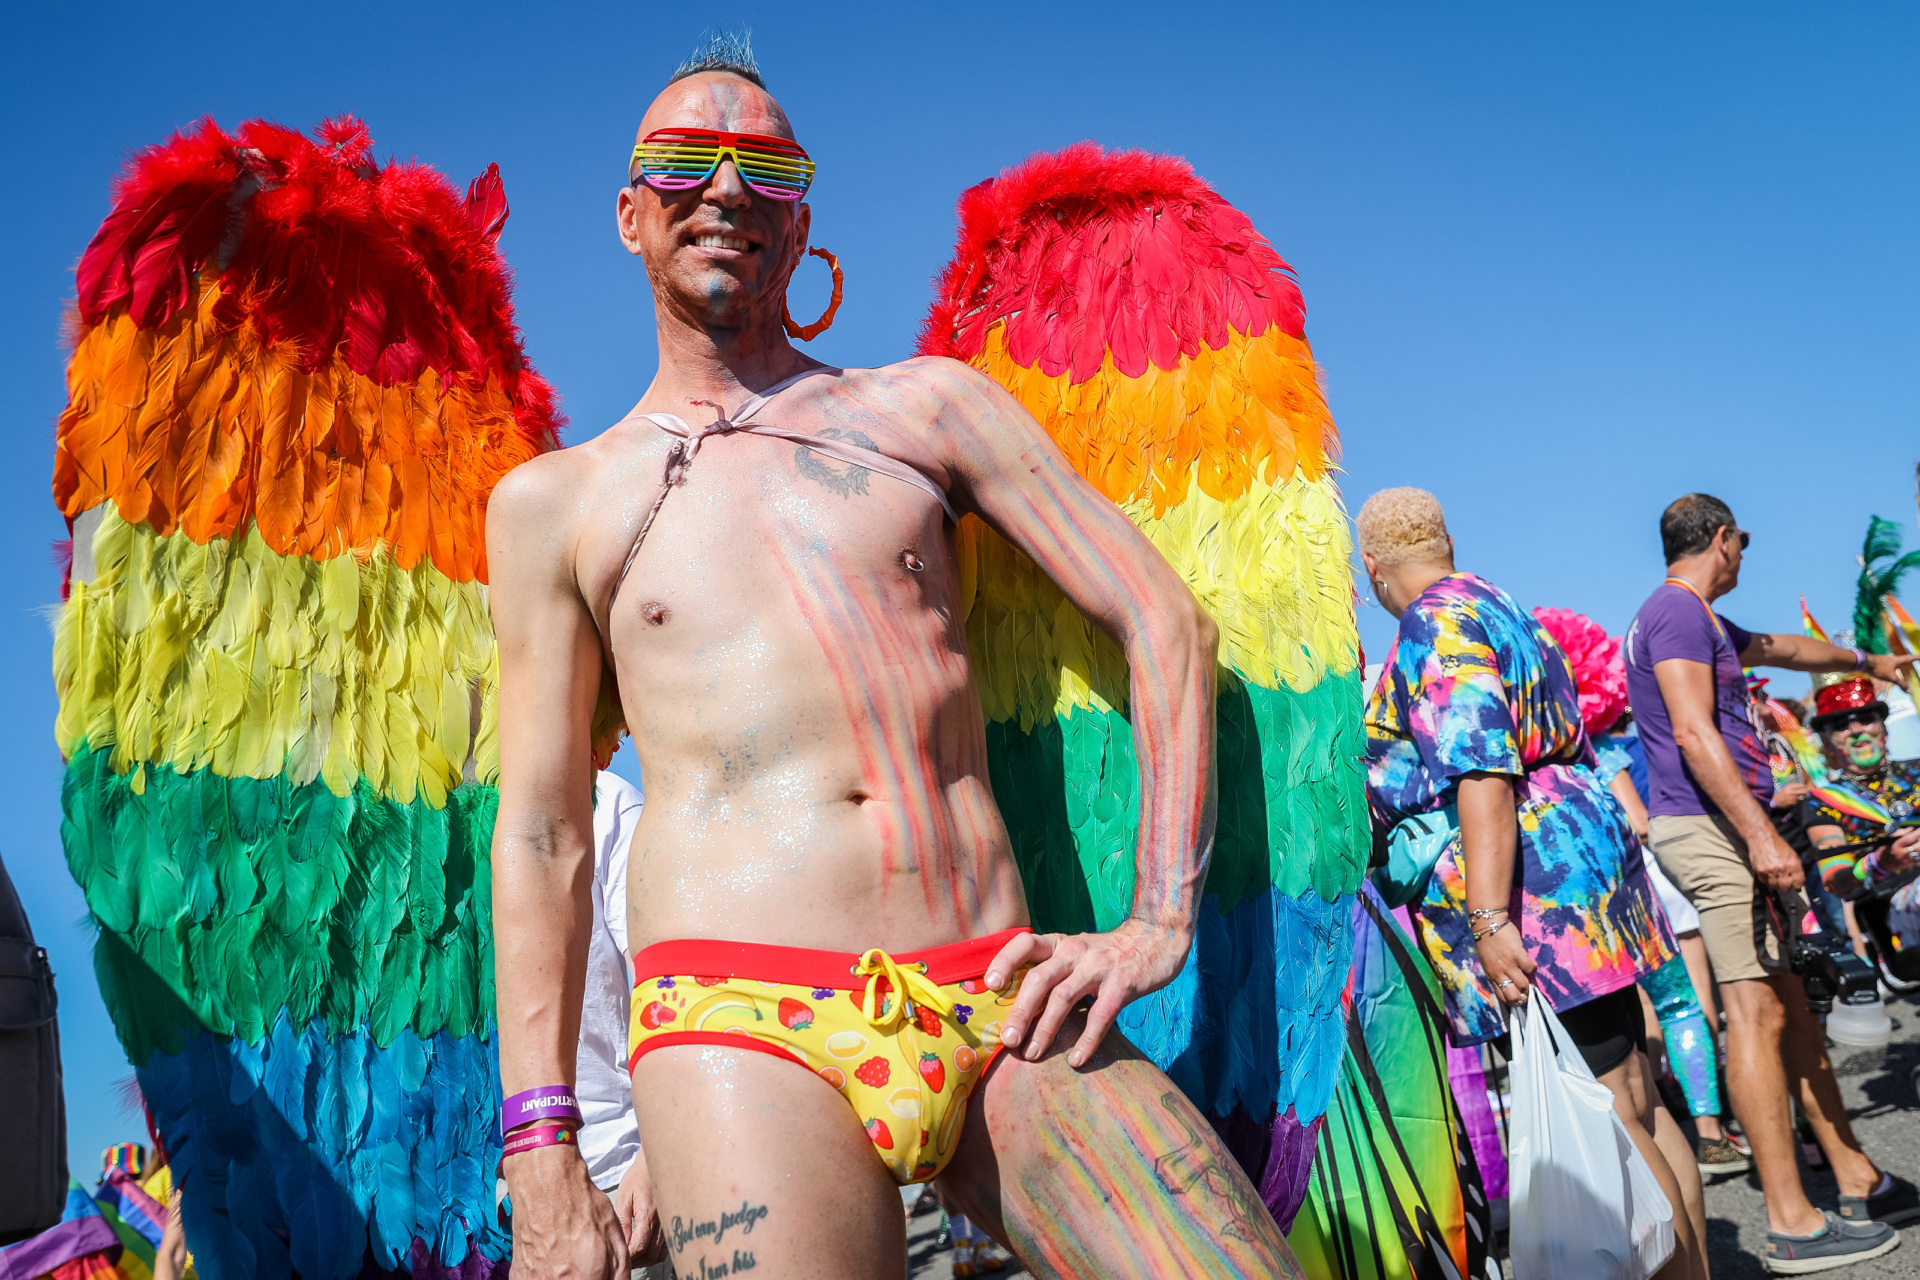 Brighton, UK - August 6: A festival goer poses at the Pride LGBTQ+ Community Parade - 'Love, Protest and Unity' during Brighton Pride on August 6, 2022 in Brighton, UK posture.  (Photo by Tristan Fiennes/Getty Images)